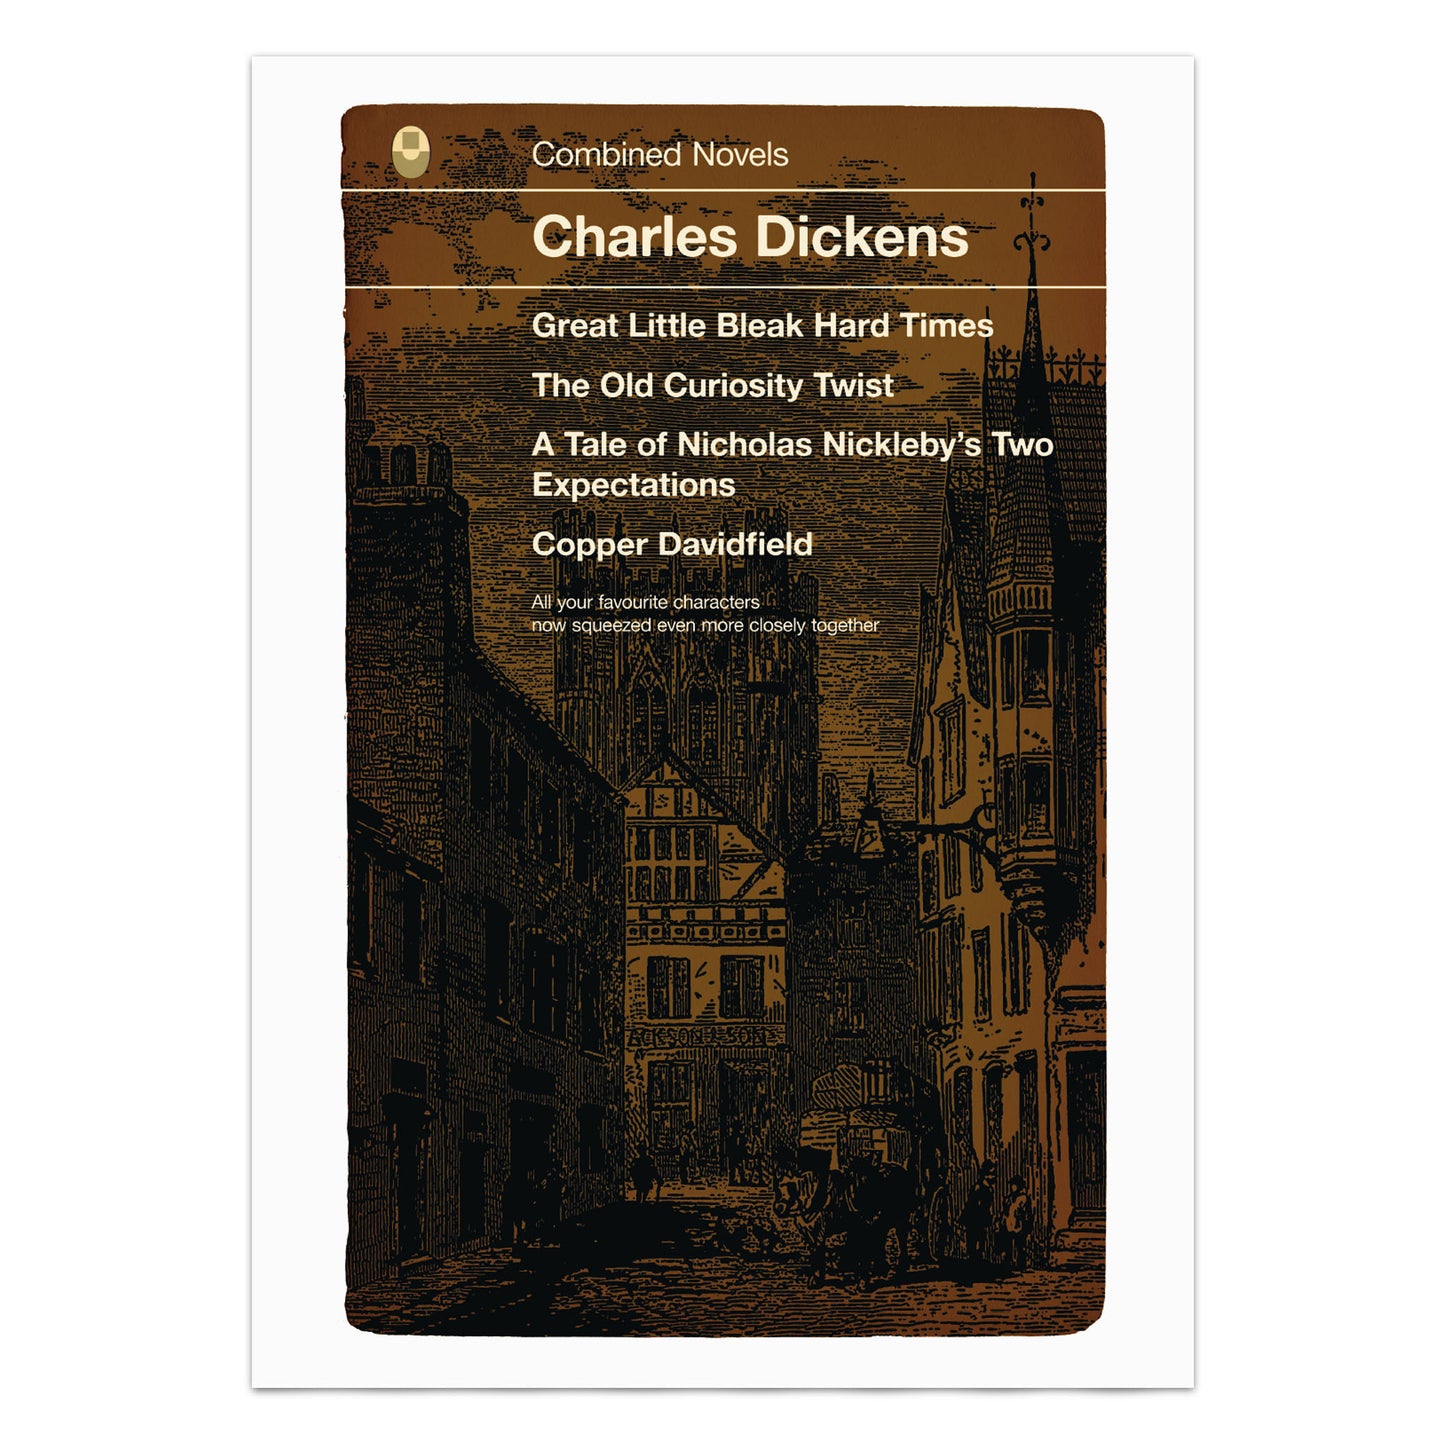 Charles Dickens 'Combined Novels' Book Cover Print